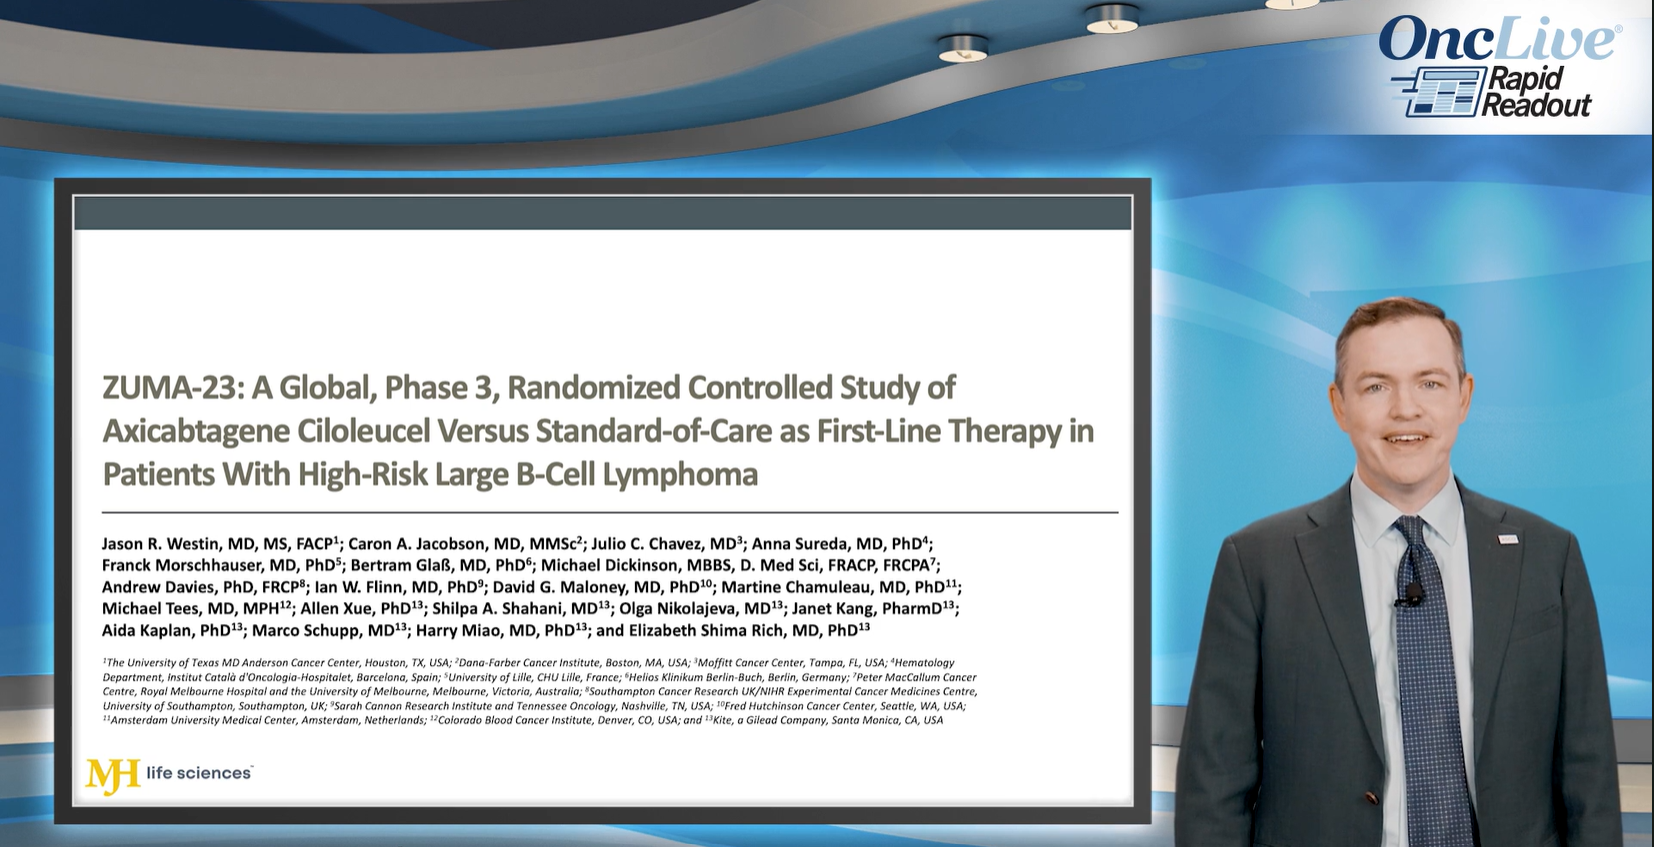 ZUMA-23: A Global, Phase 3, Randomized Controlled Study of Axicabtagene Ciloleucel Versus Standard-of-Care as First-Line Therapy in Patients With High-Risk Large B-Cell Lymphoma